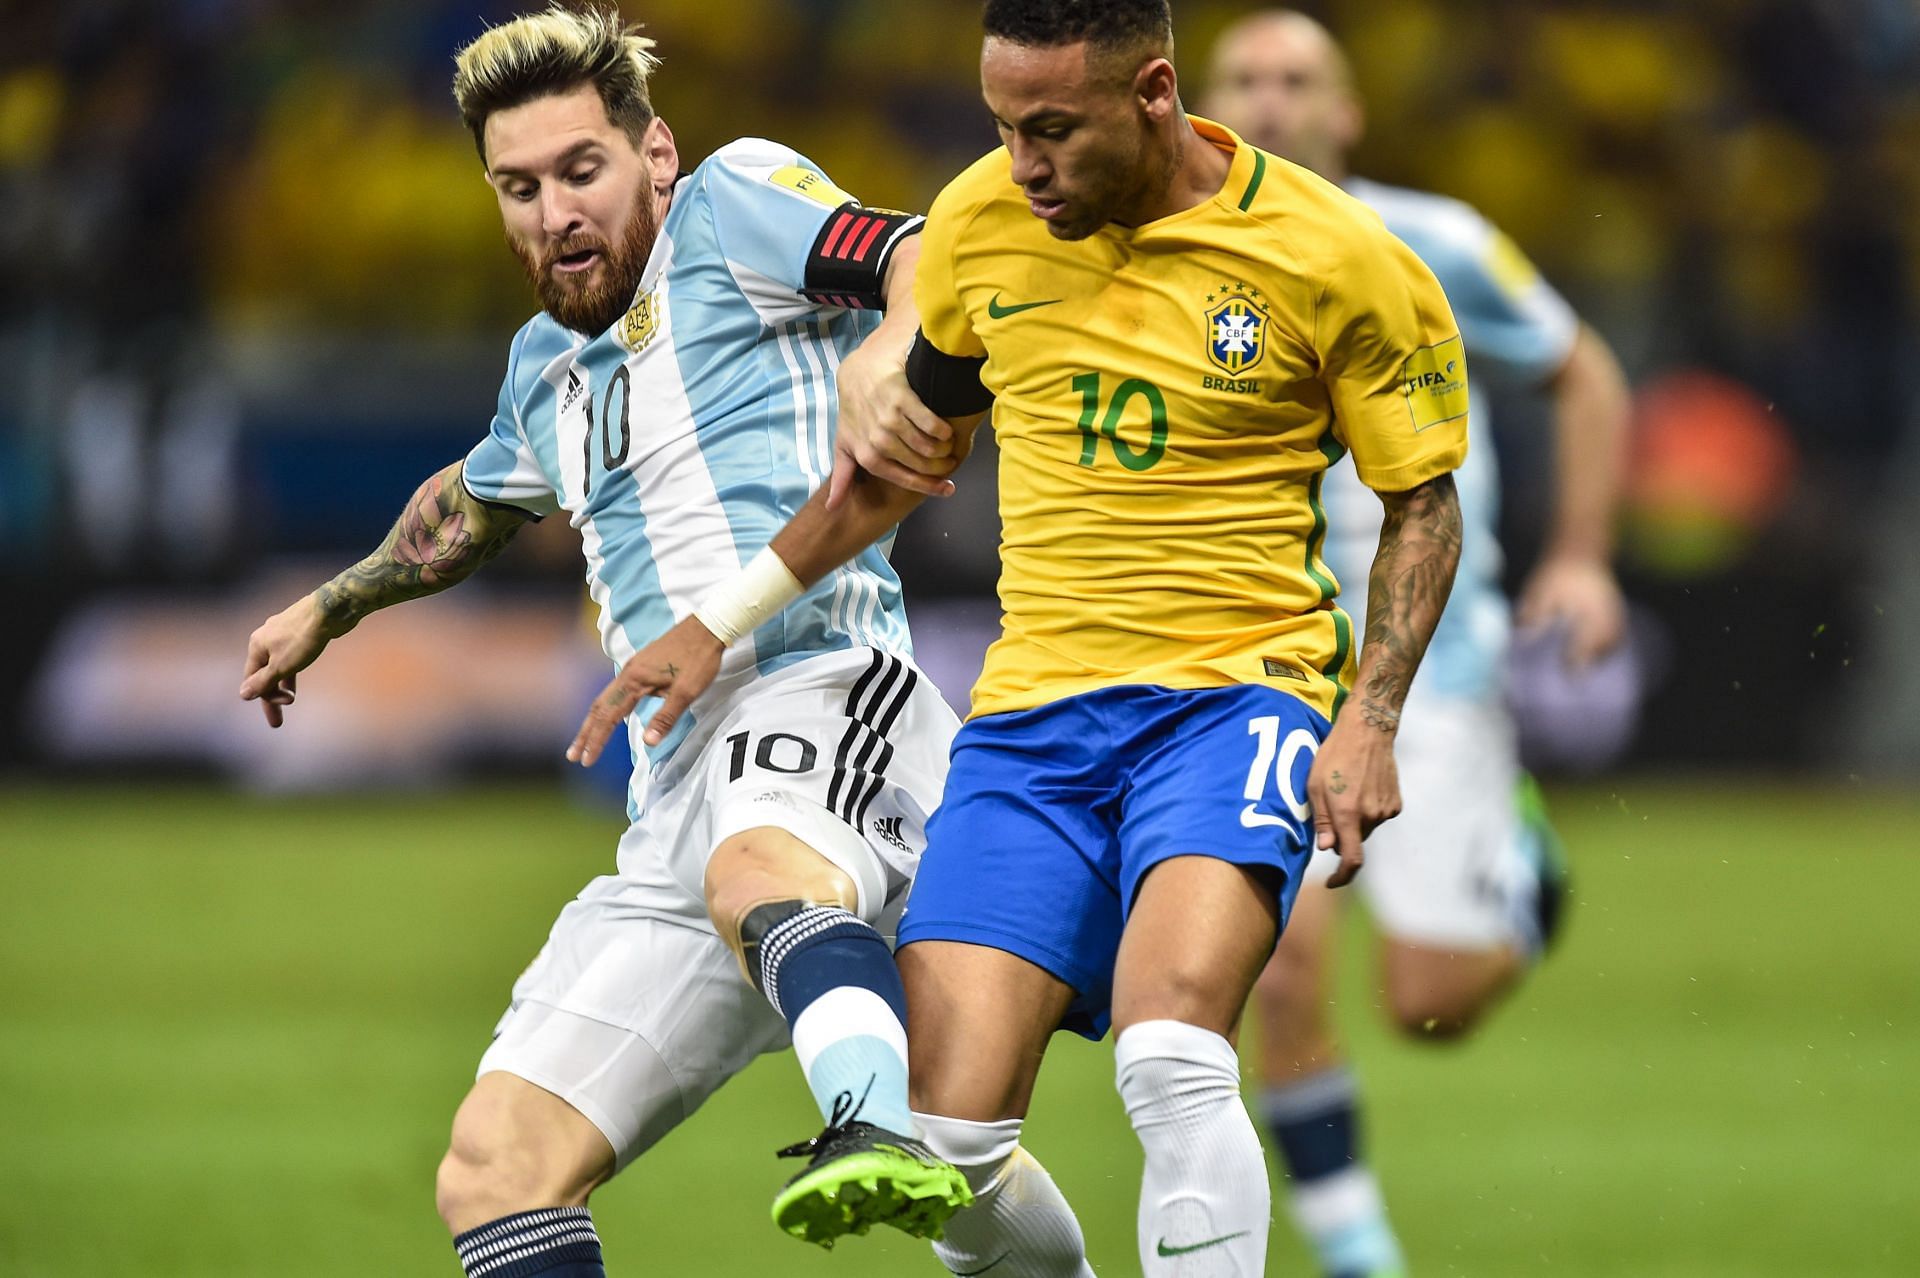 Lionel Messi and Neymar will play important roles this year